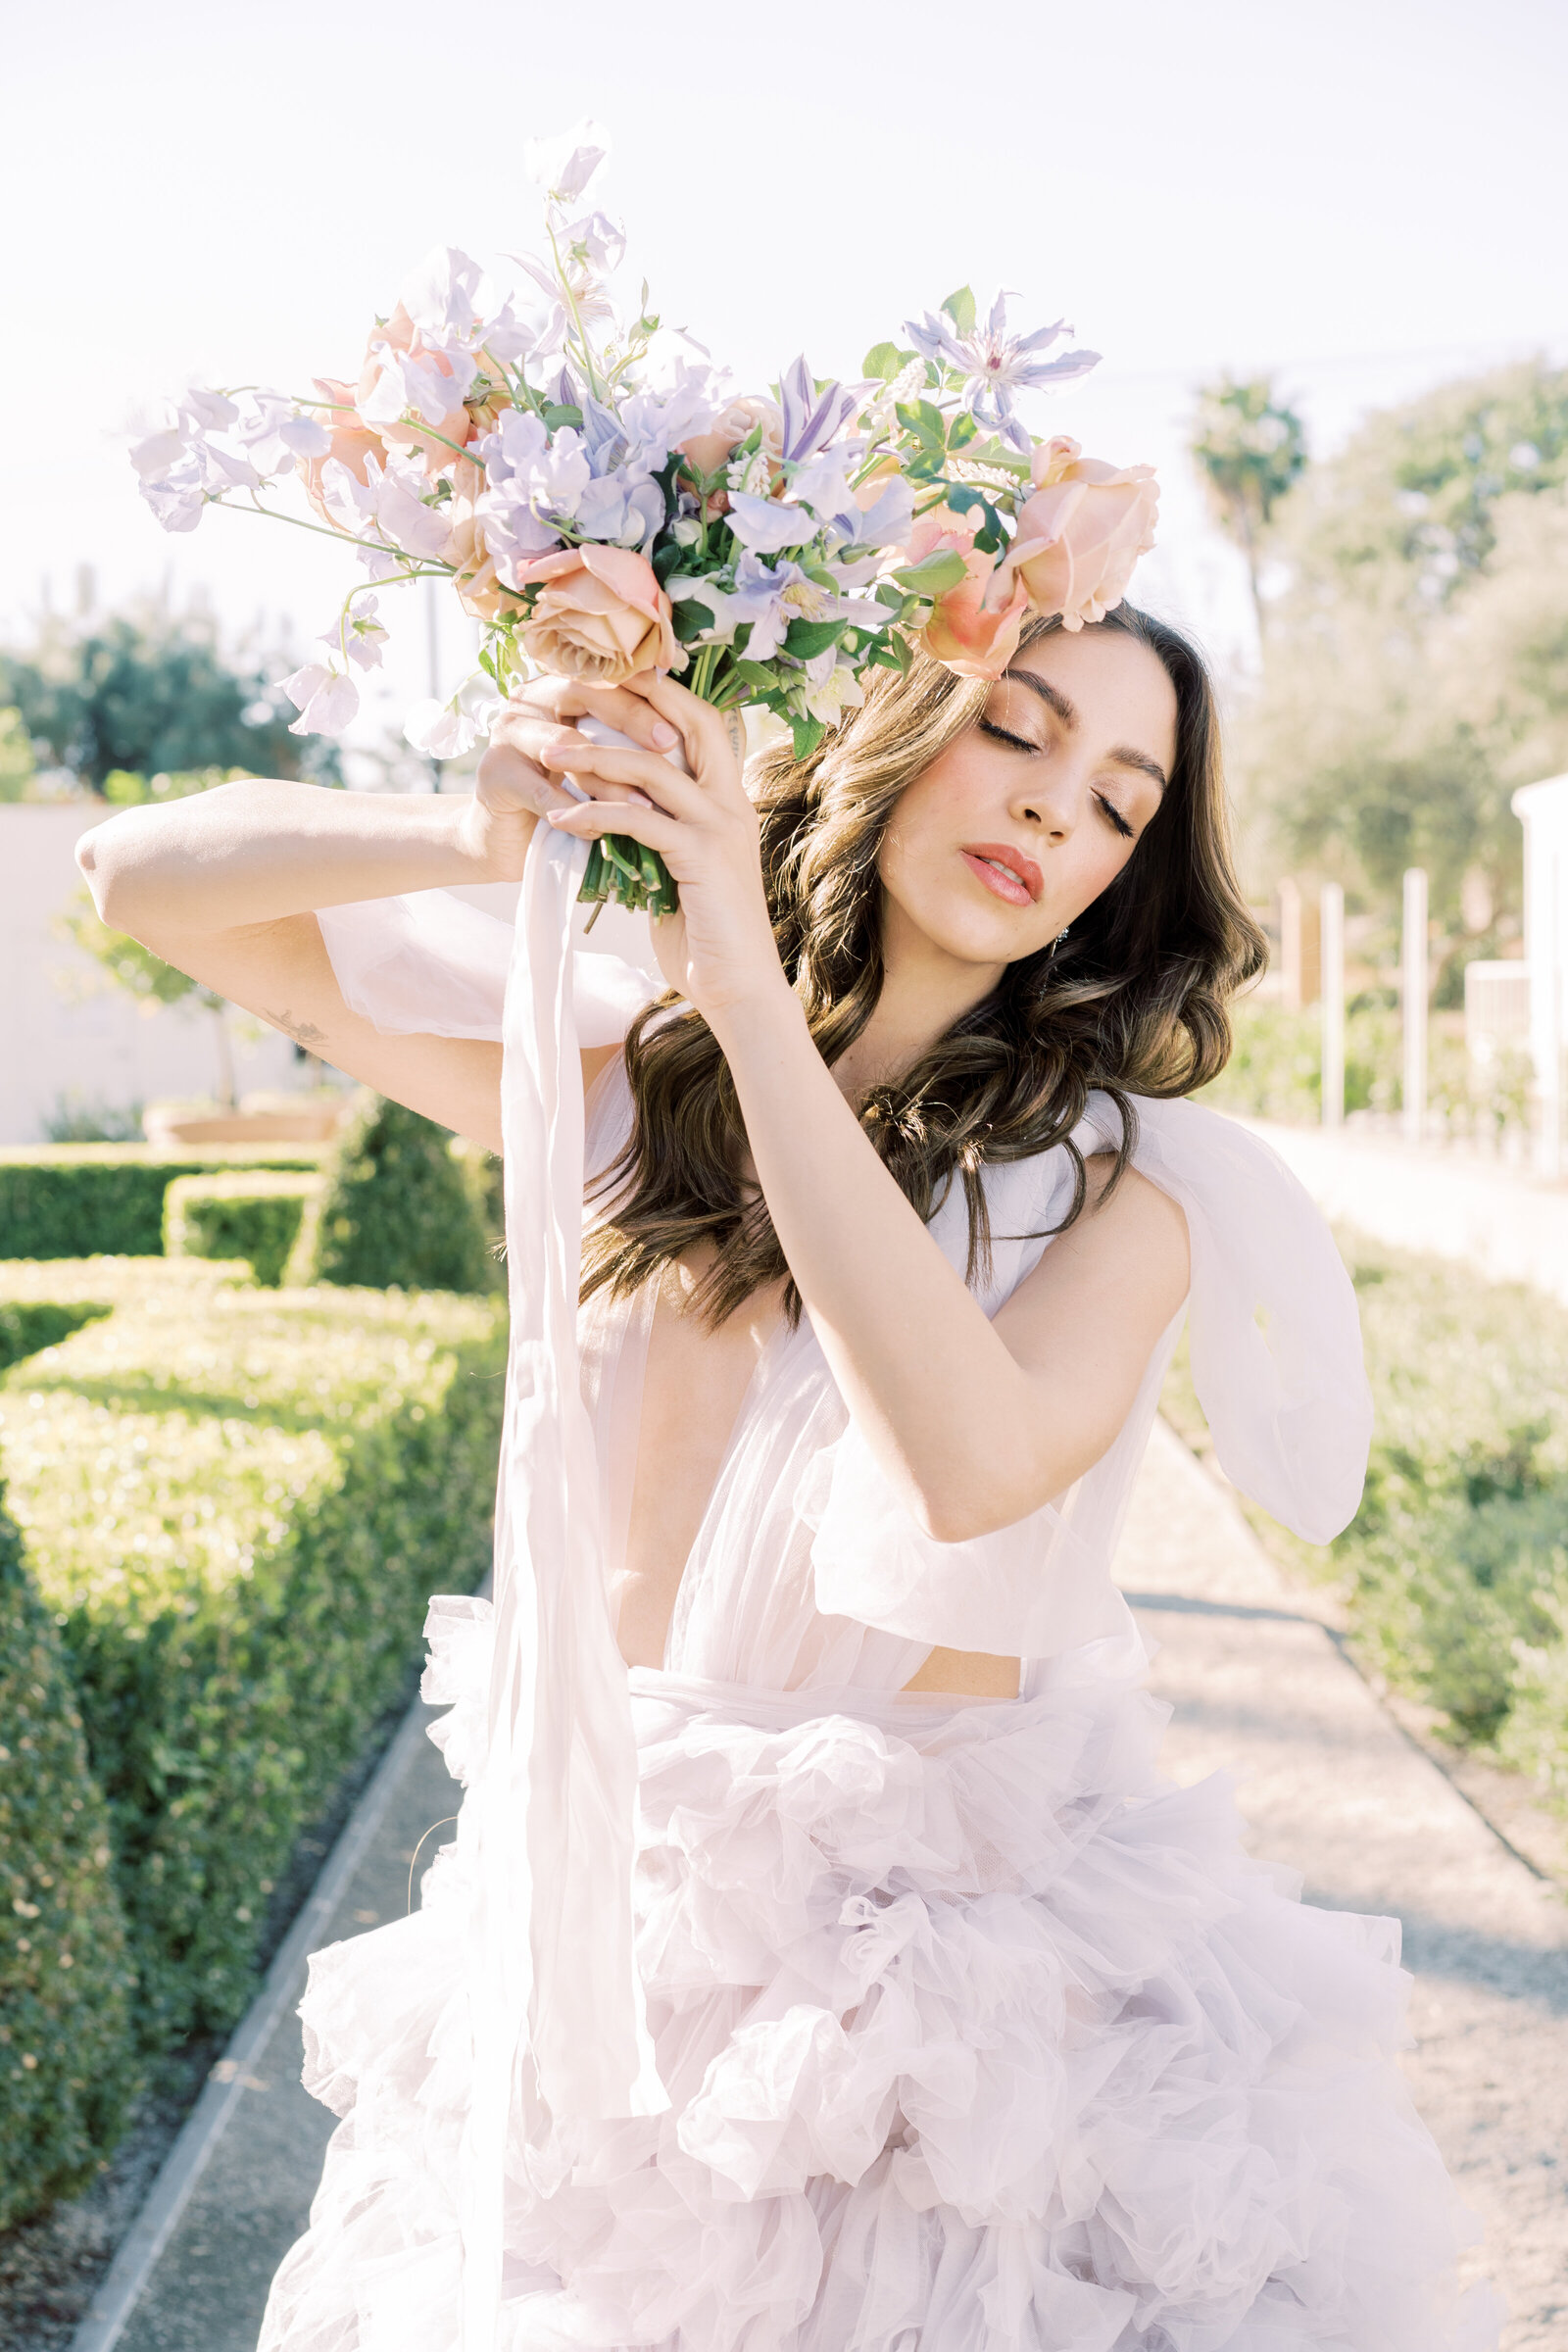 Portrait of bride in a lavender gown holding a bouquet in a garden outdoors